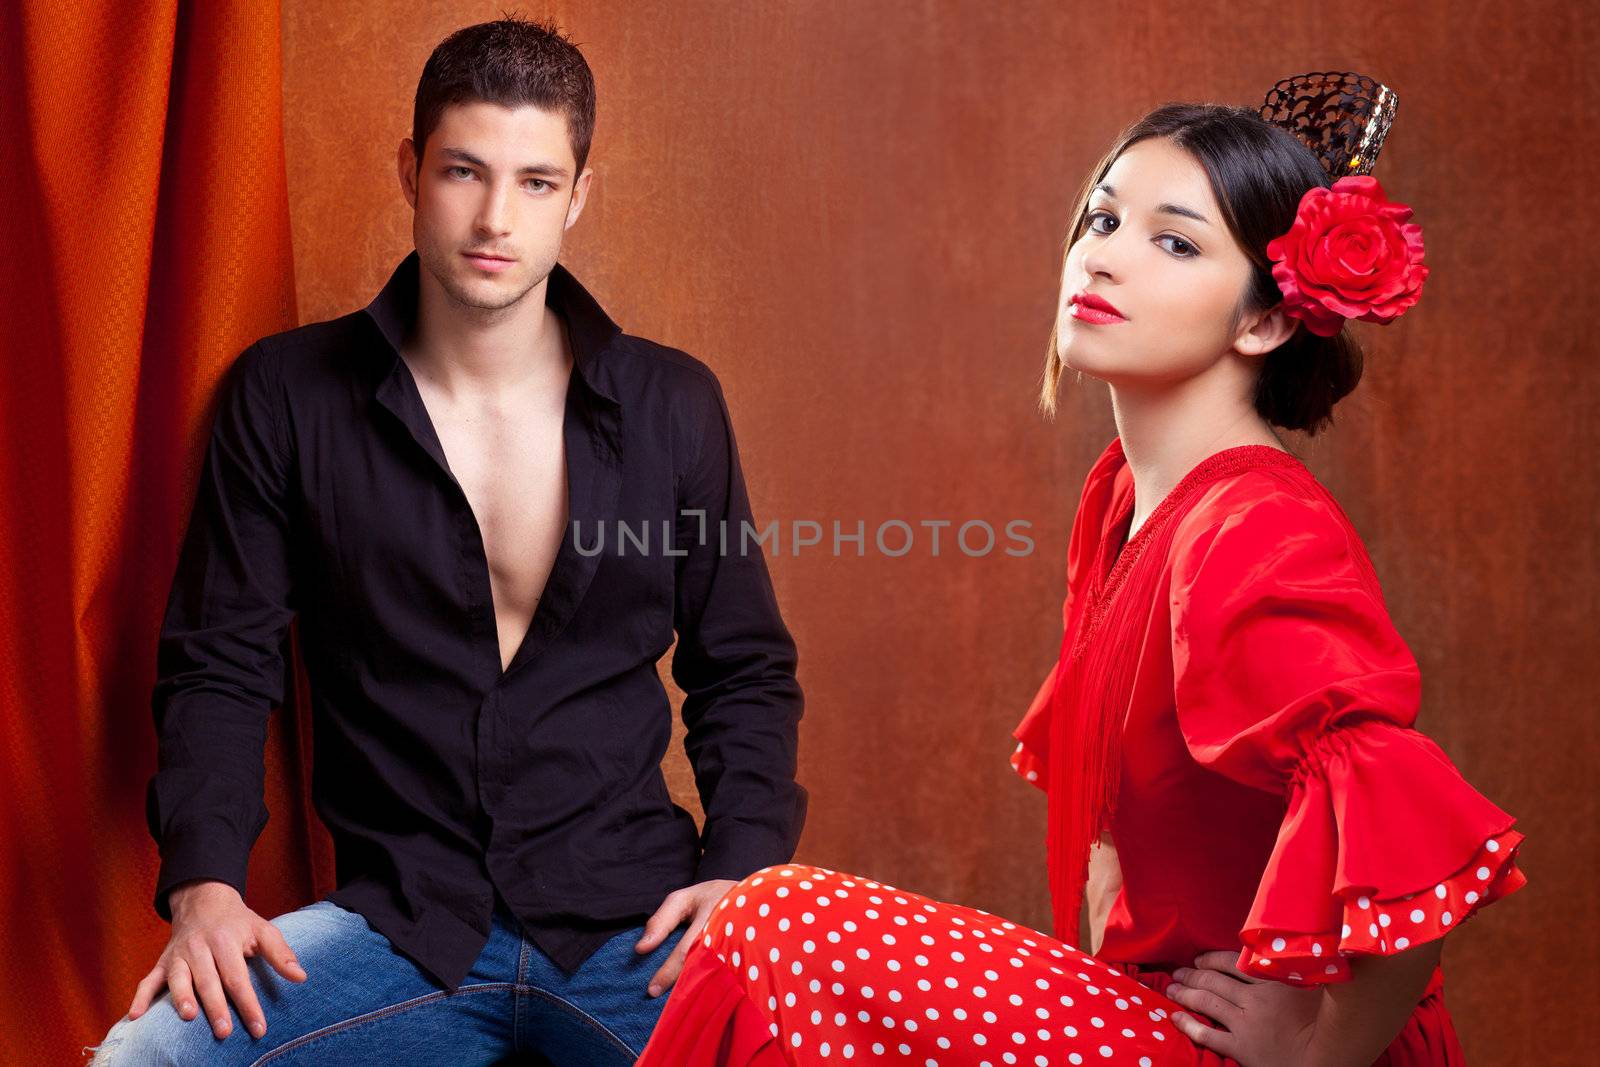 Gipsy flamenco dancer couple from Spain with red rose and spanish back comb peineta